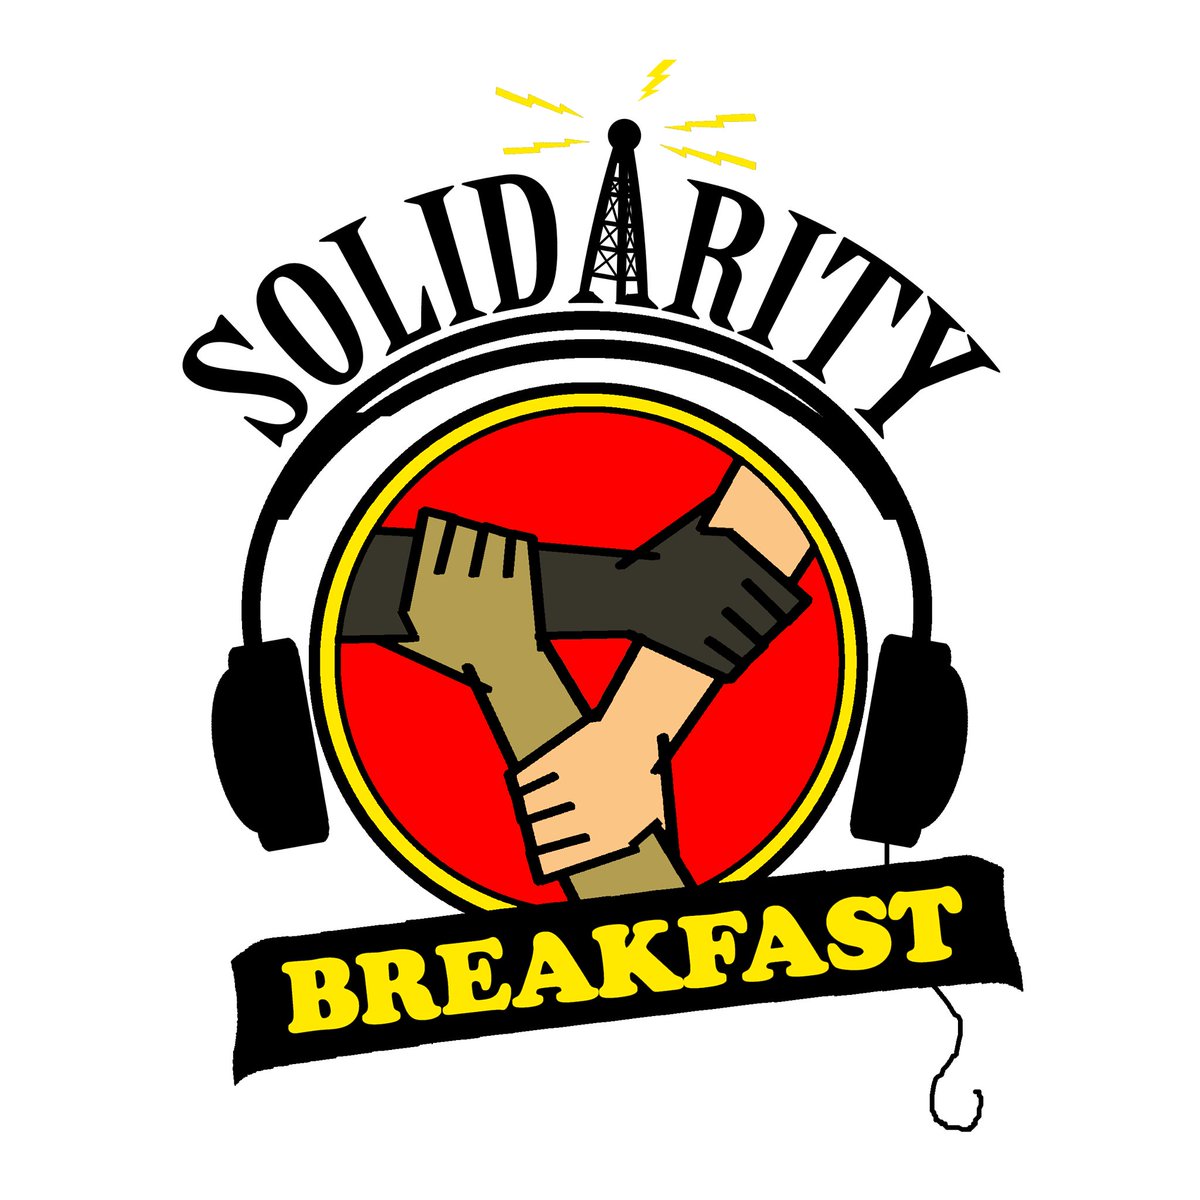 .@3CRsolidarity goes on the air at 7:30 AM Eastern Australia Time on Melbourne's @3CR 855 AM. Listen live at 3cr.org.au #1u #UnionStrong #LaborRadioPod